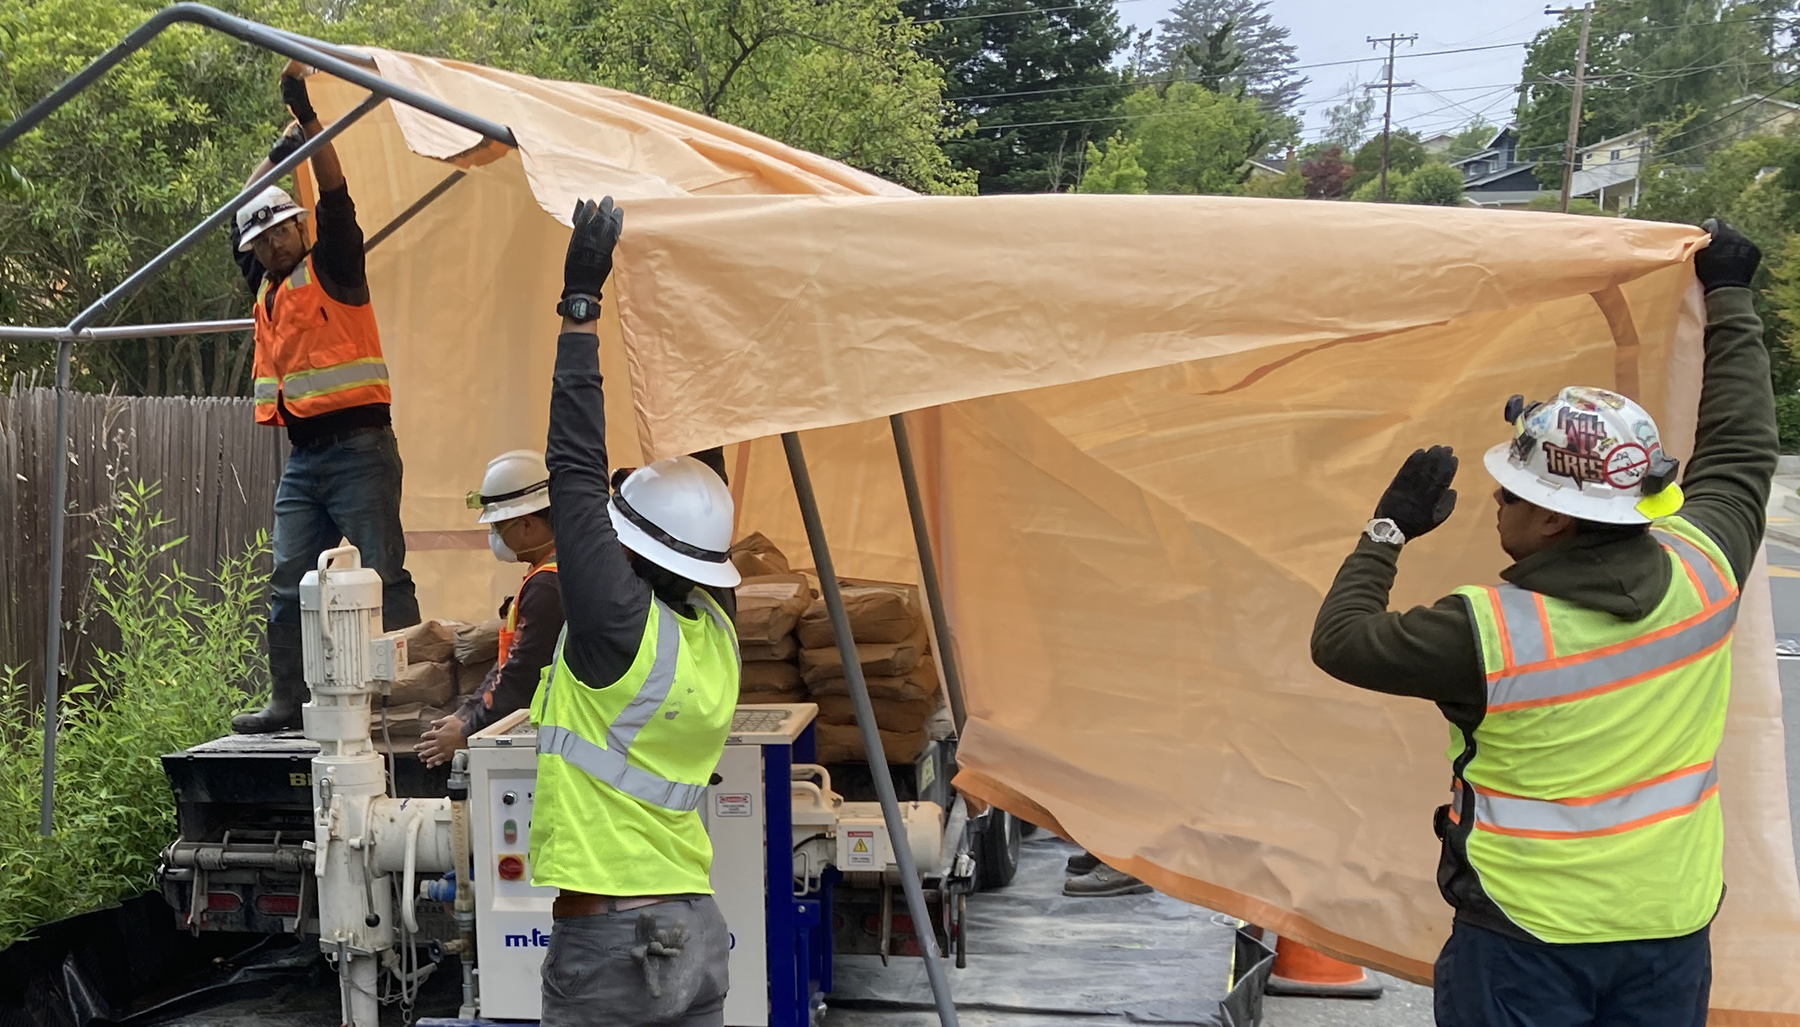 workers place tarps